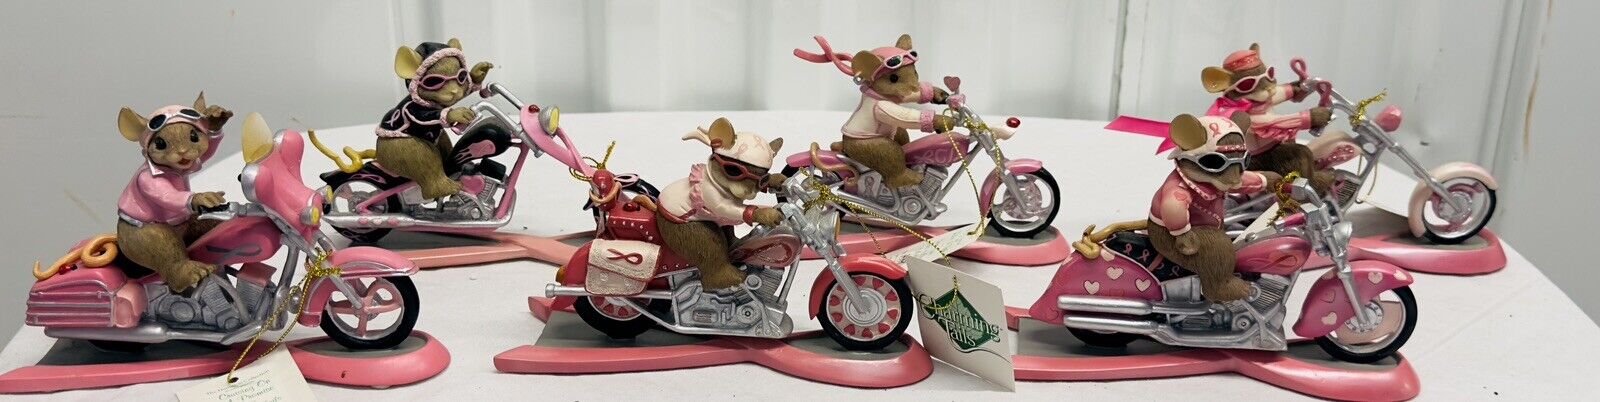 The Hamilton Collection Trails Of A Cure Breast Cancer Hog Motorcycle Mice Set 6